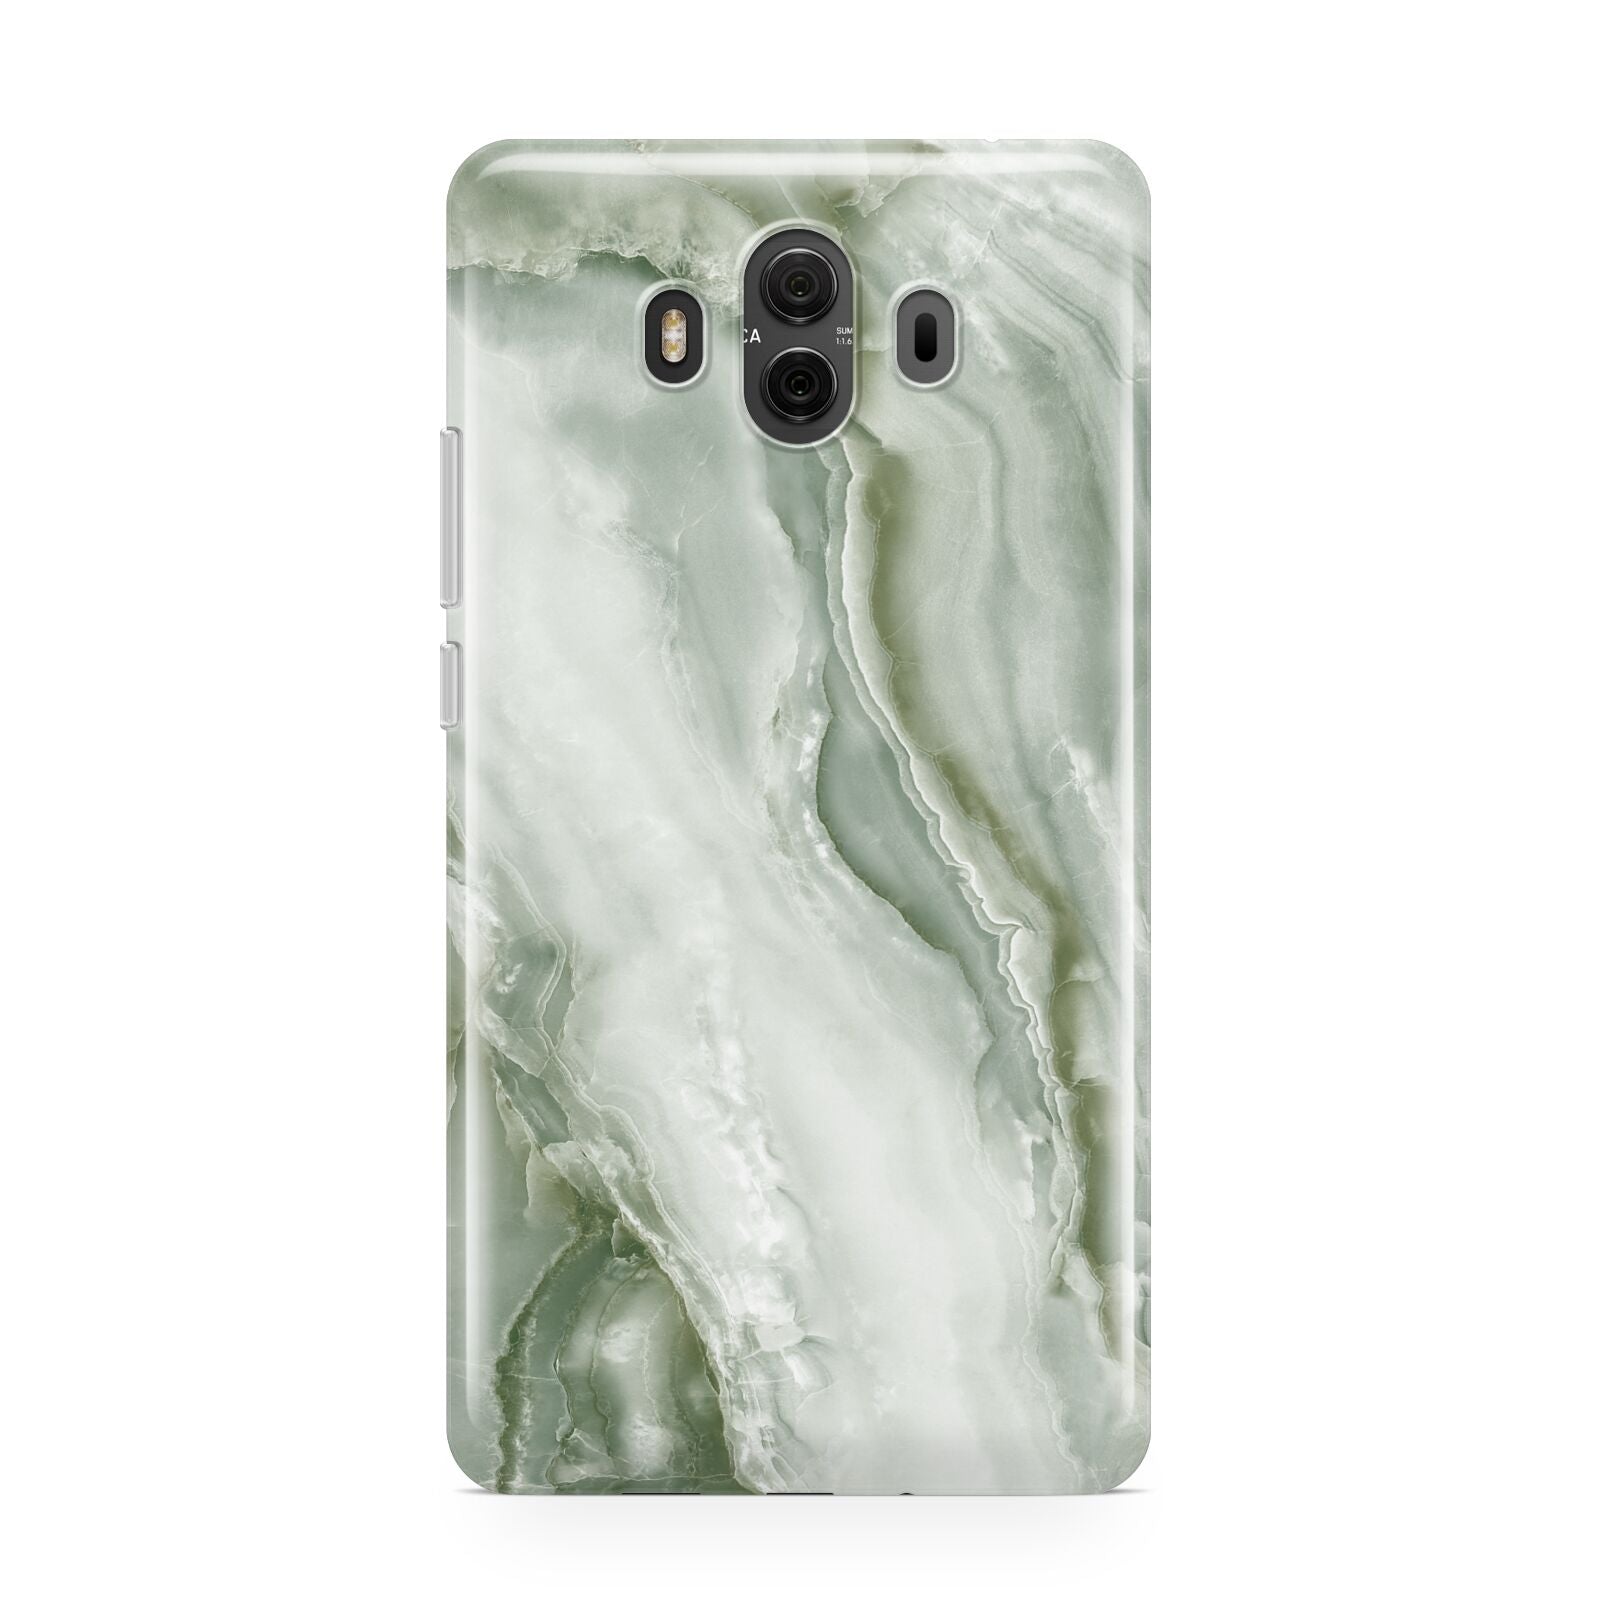 Pistachio Green Marble Huawei Mate 10 Protective Phone Case